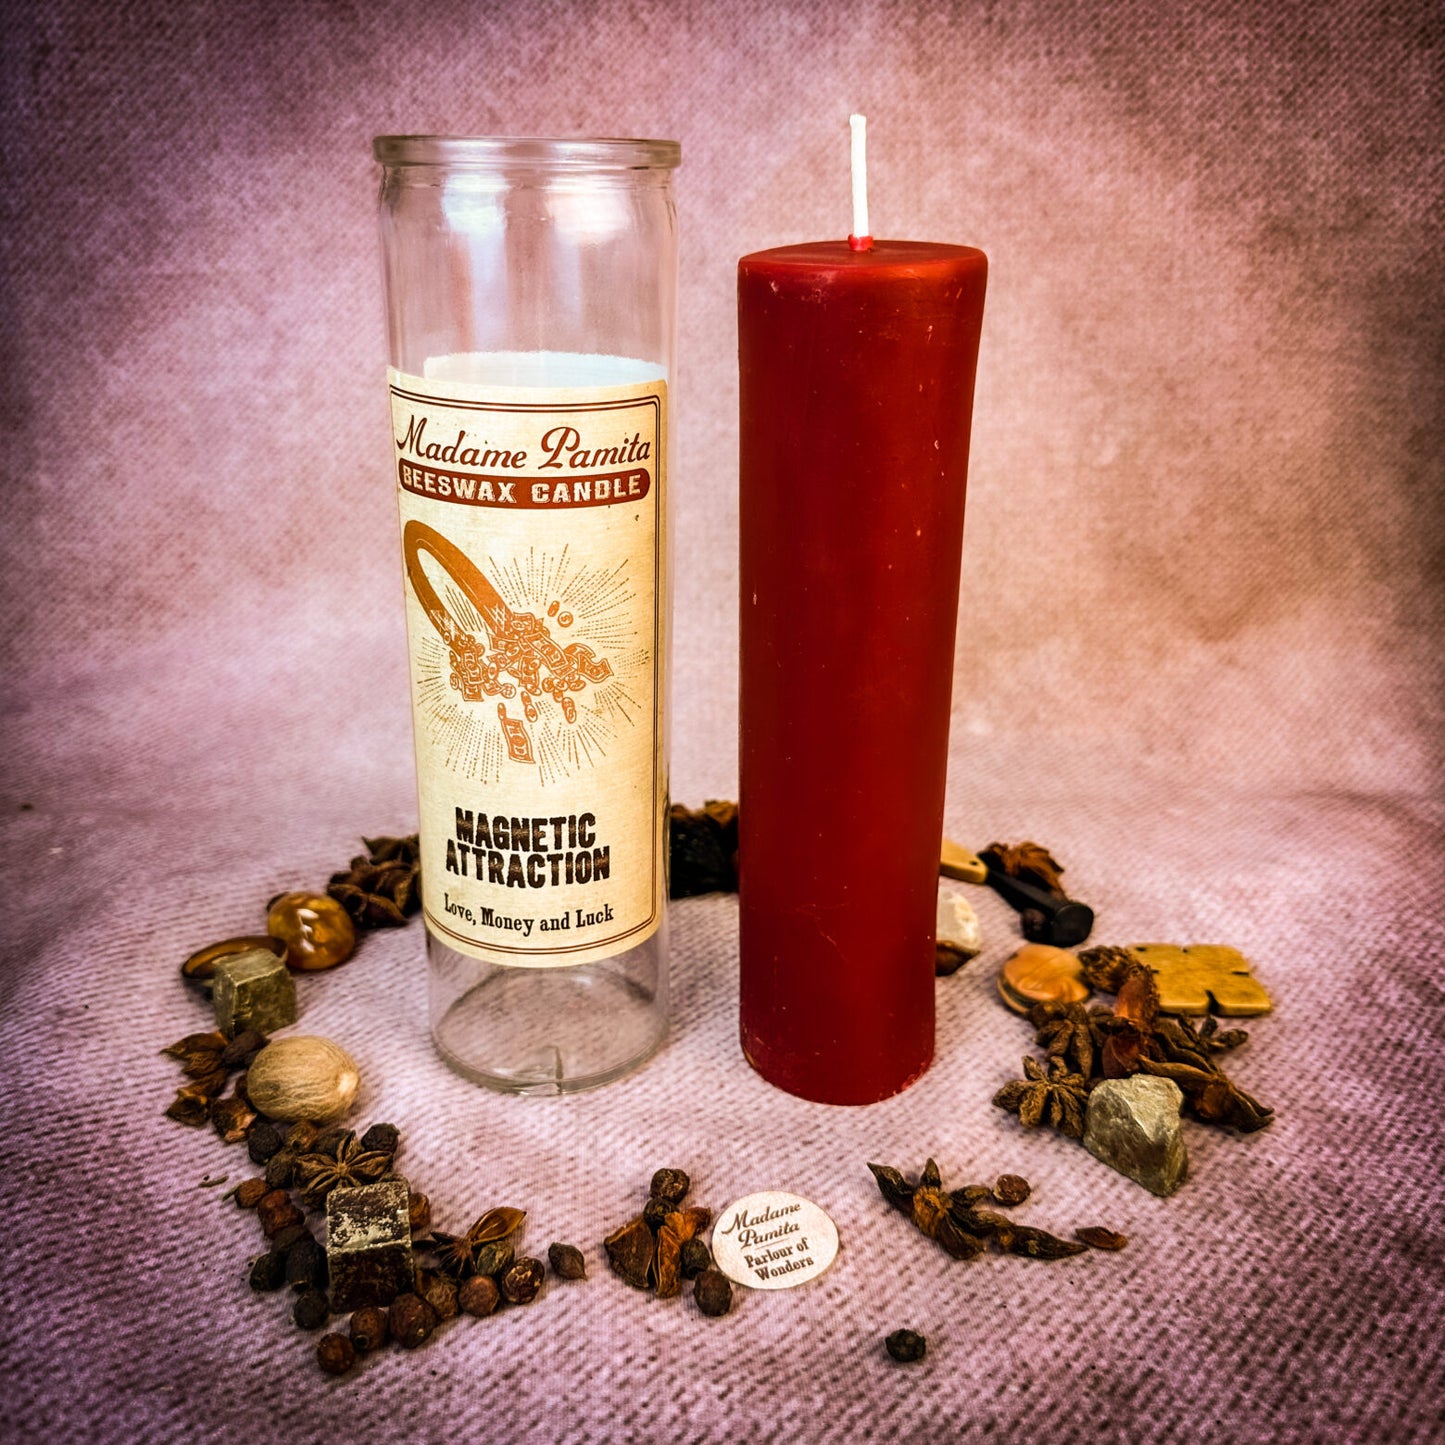 Madame Pamita Magnetic Attraction Beeswax Vigil Candle